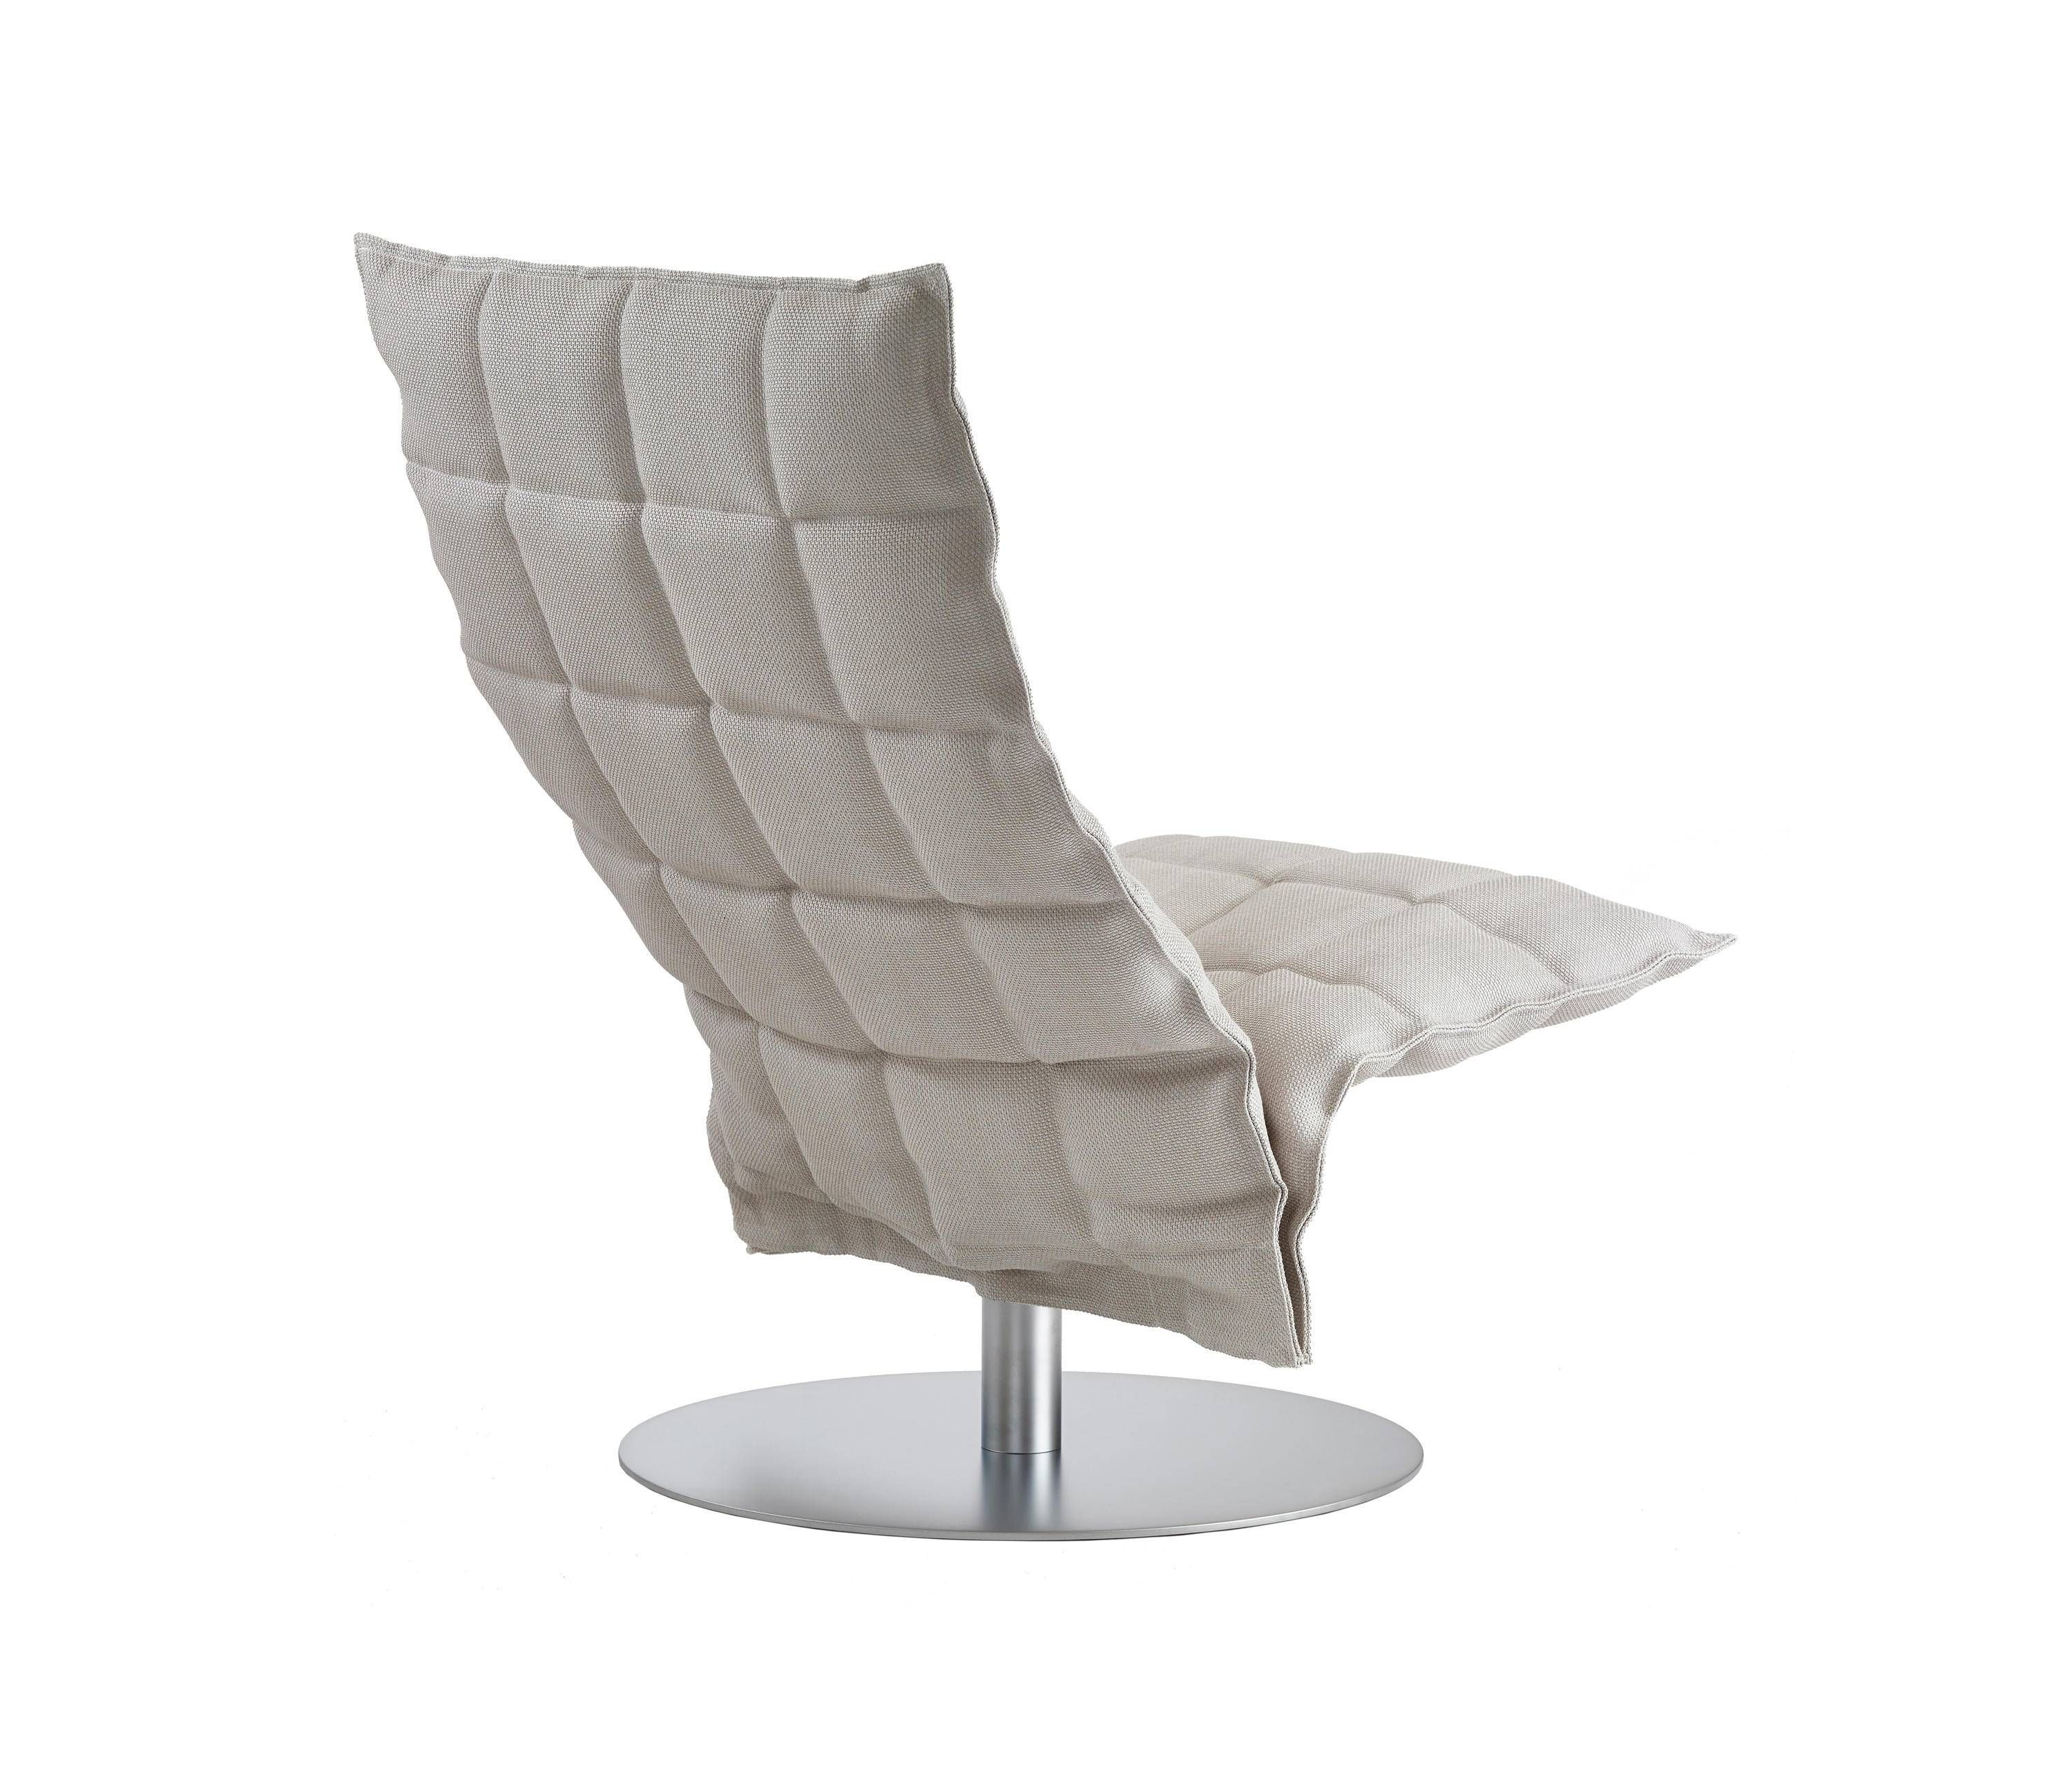 K Chair | Narrow | Swivel – Armchairs From Woodnotes | Architonic With Narrow Armchairs (View 8 of 30)